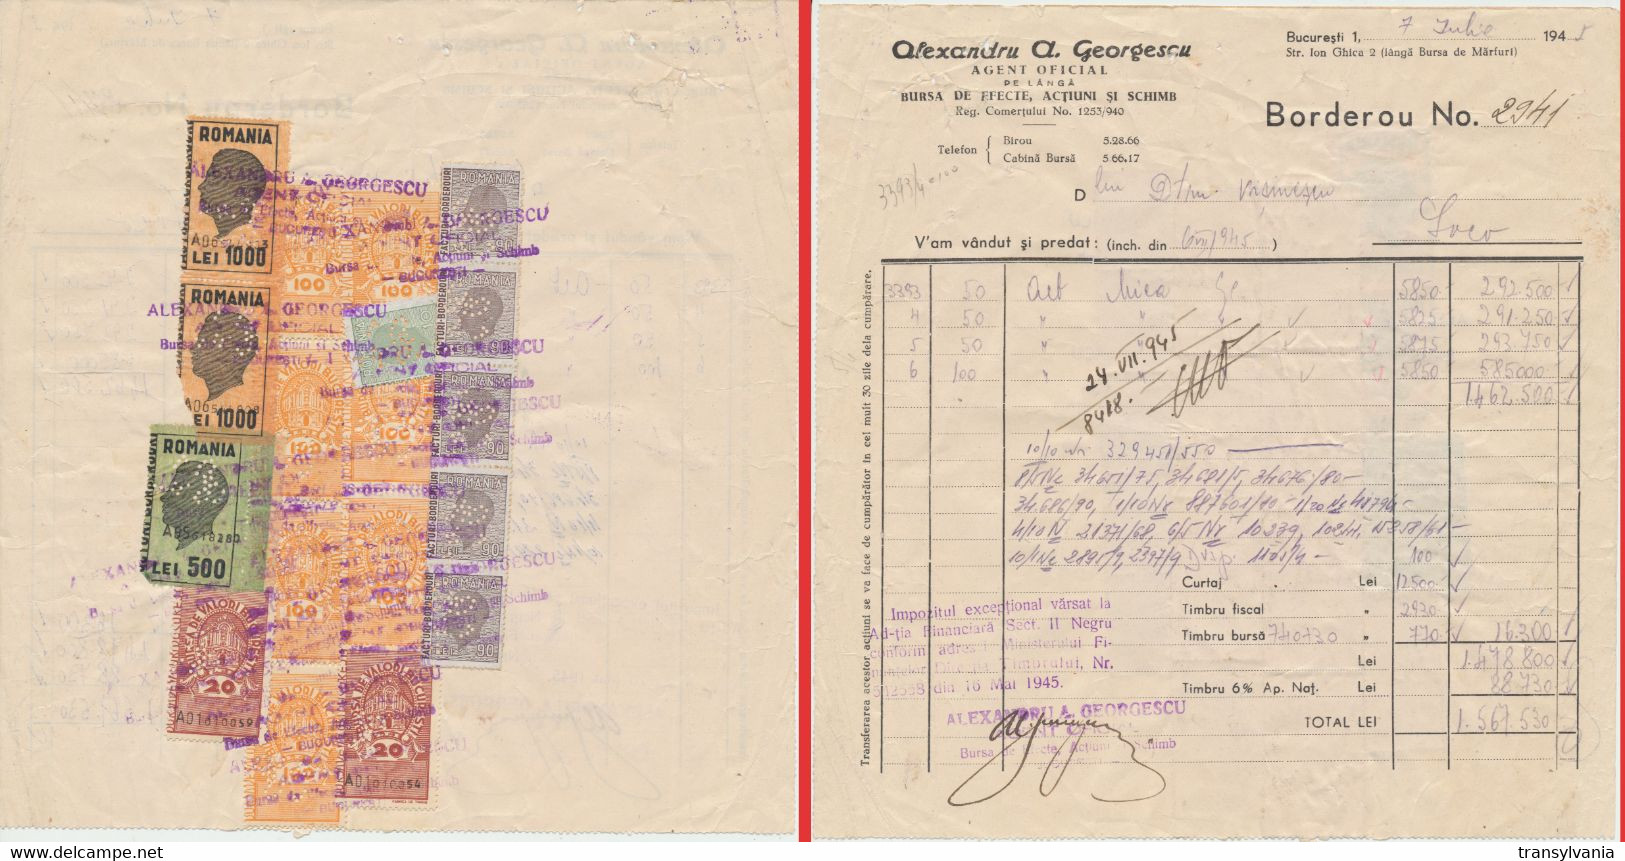 Romania 1945 Document Trade Agent Alexandru Georgescu With Perfins Inflation Revenue & Bourse Stamps - Fiscaux